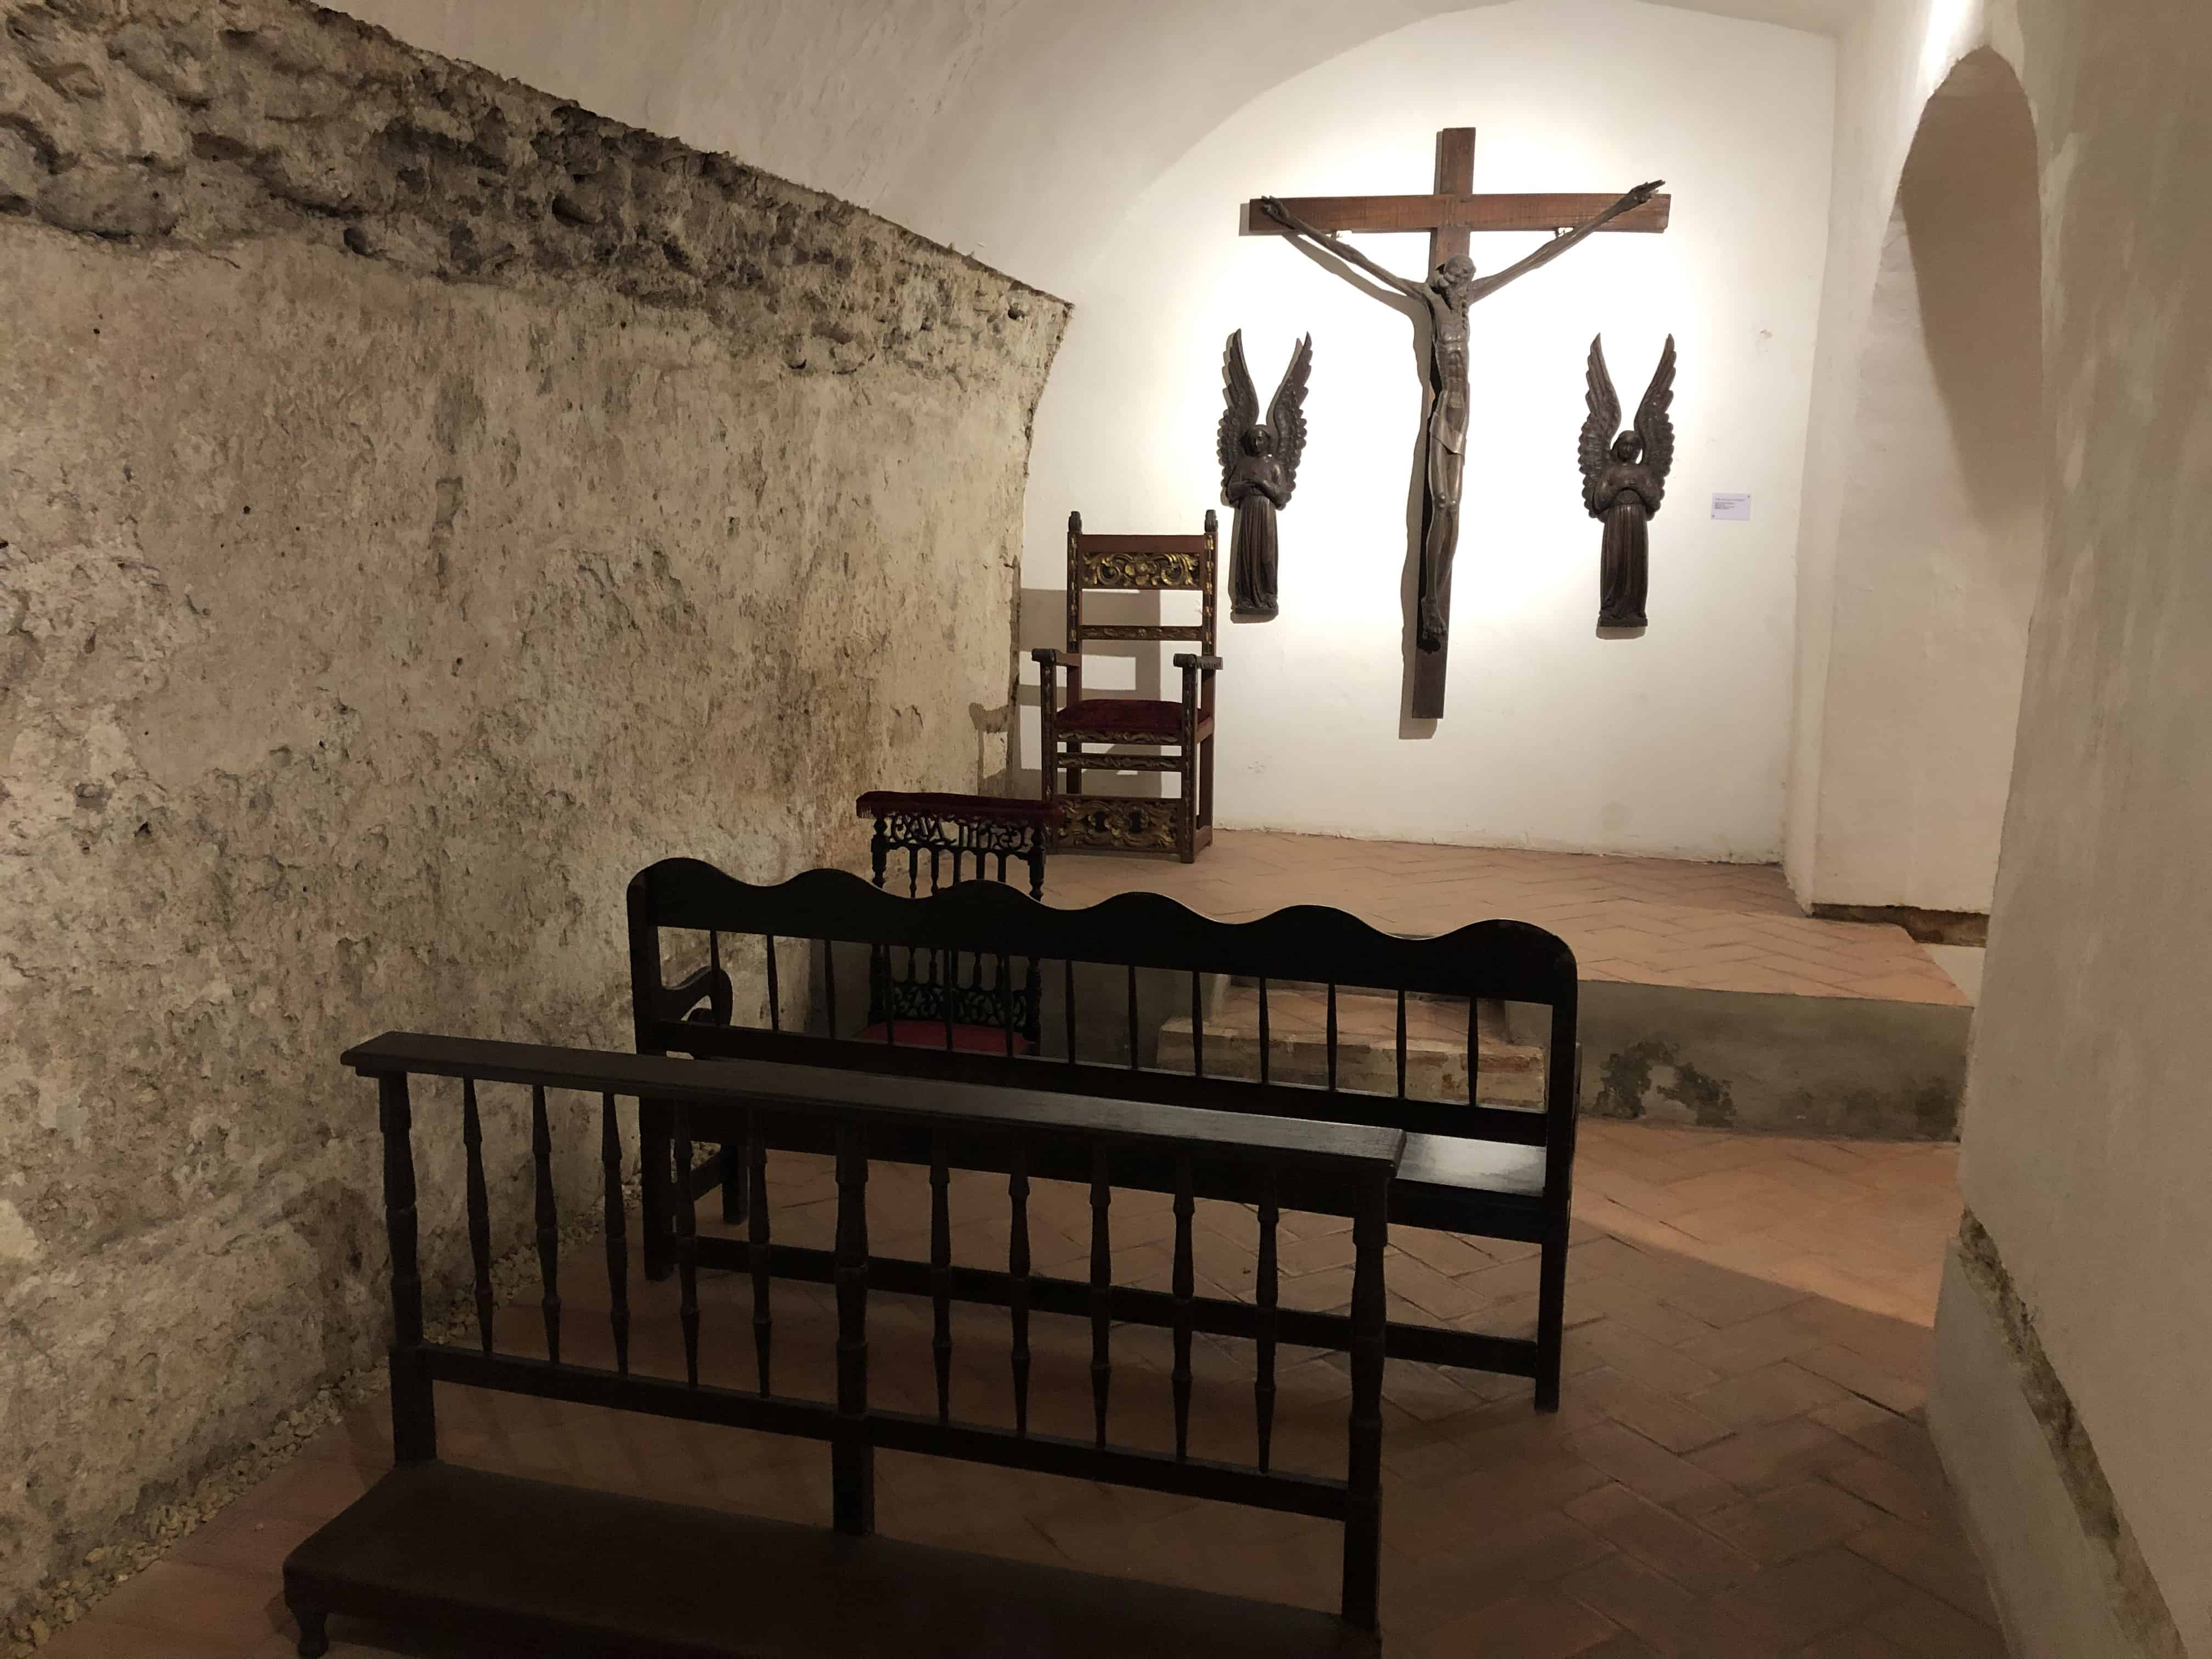 Chapel of Christ at the Sanctuary of San Pedro Claver Museum in Cartagena, Colombia